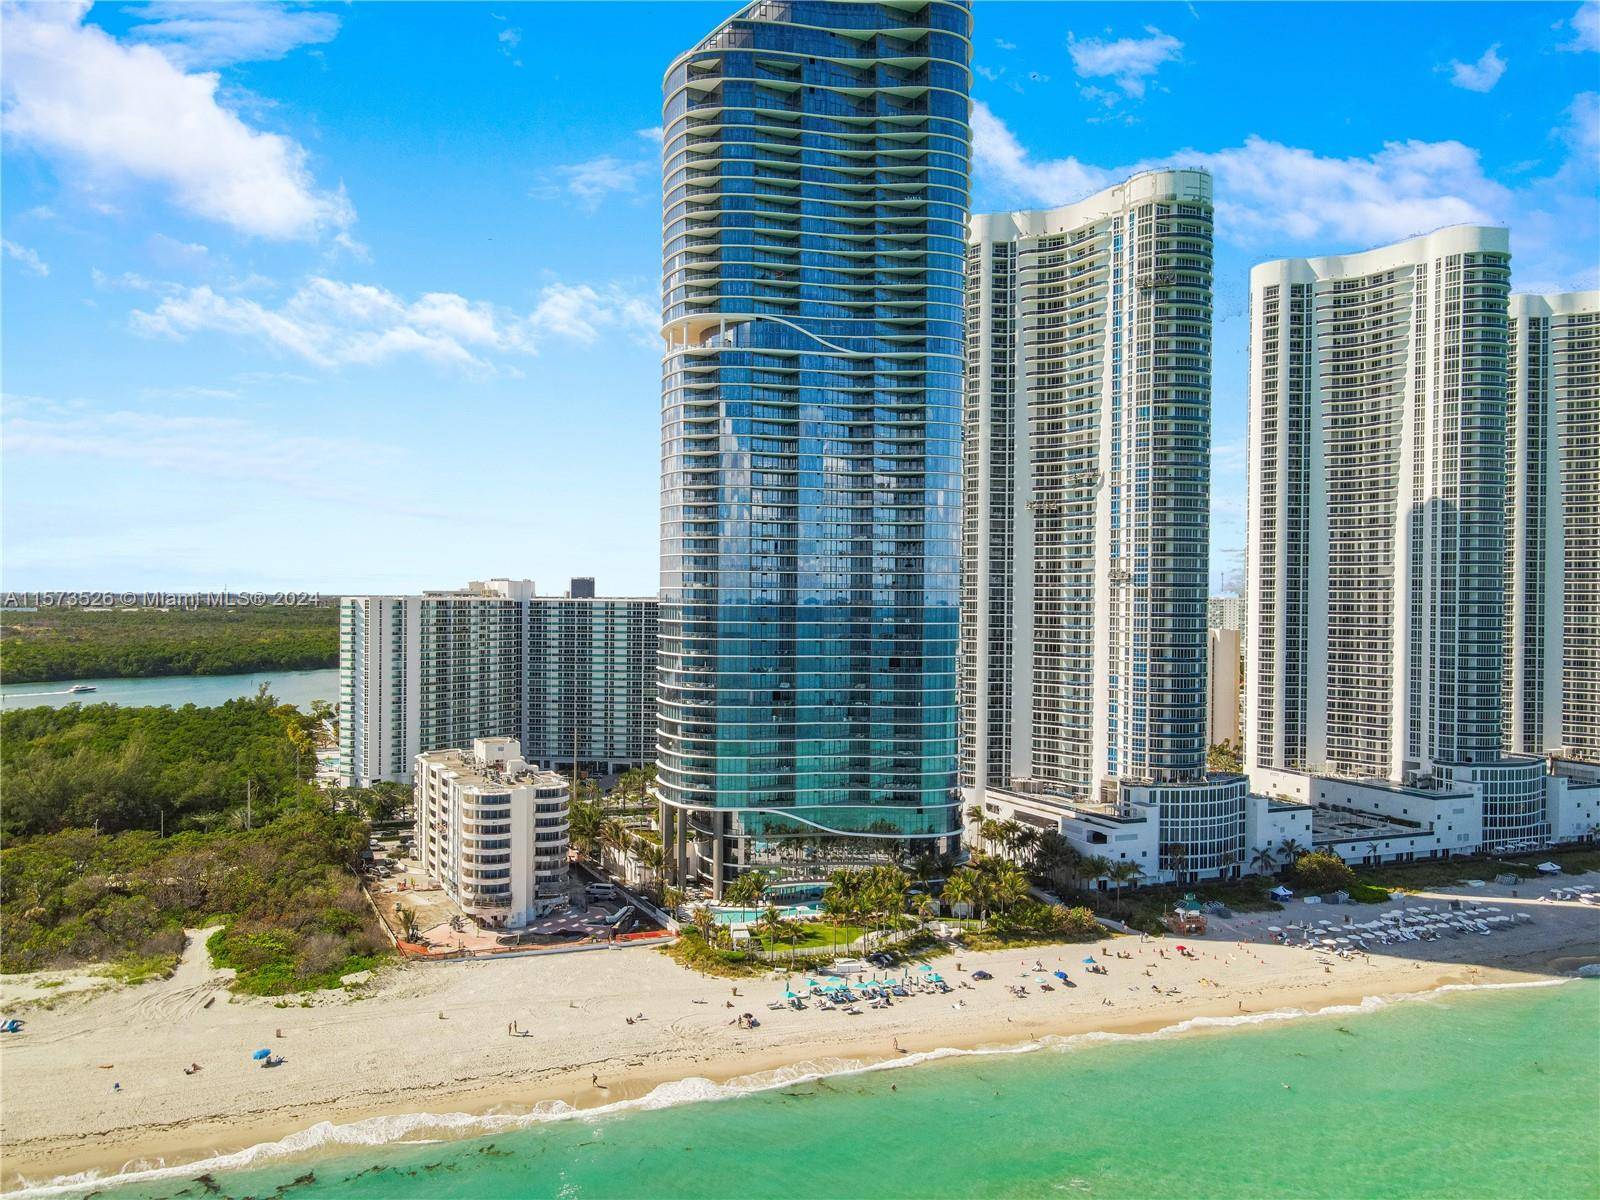 Introducing an exquisite unit at the Ritz Carlton in Sunny Isles Beach.